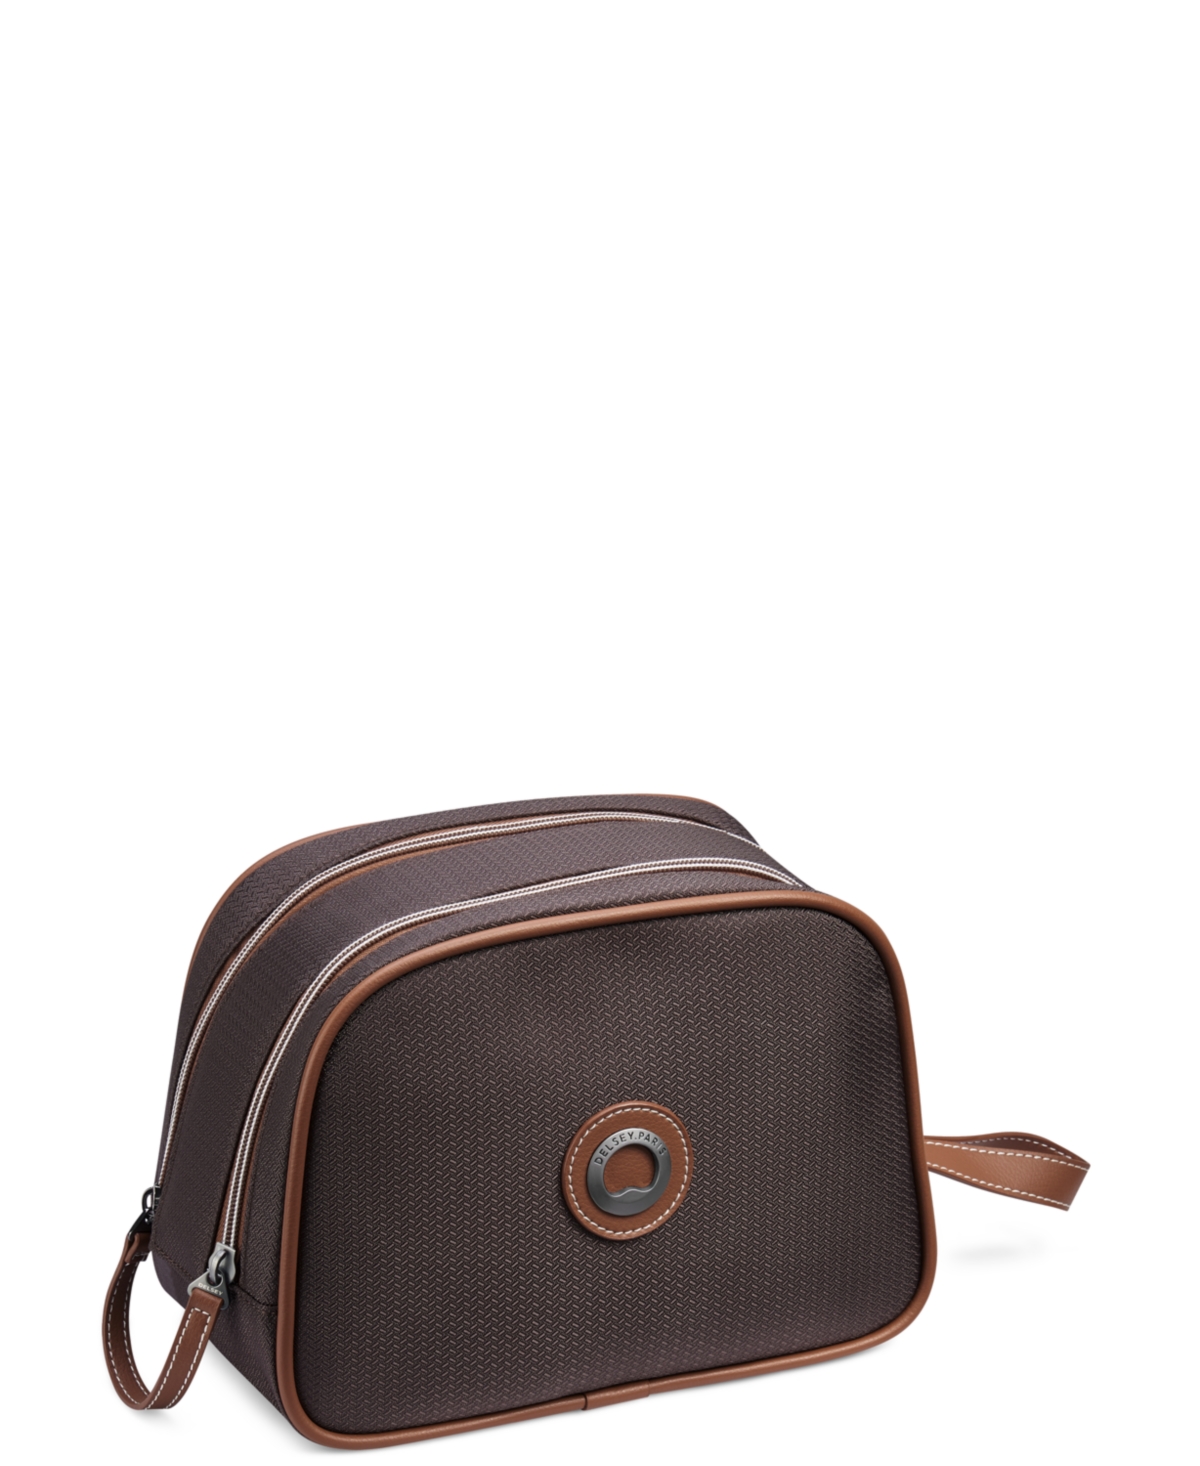 Chatelet Air 2.0 Toiletry Bag - Chocolate